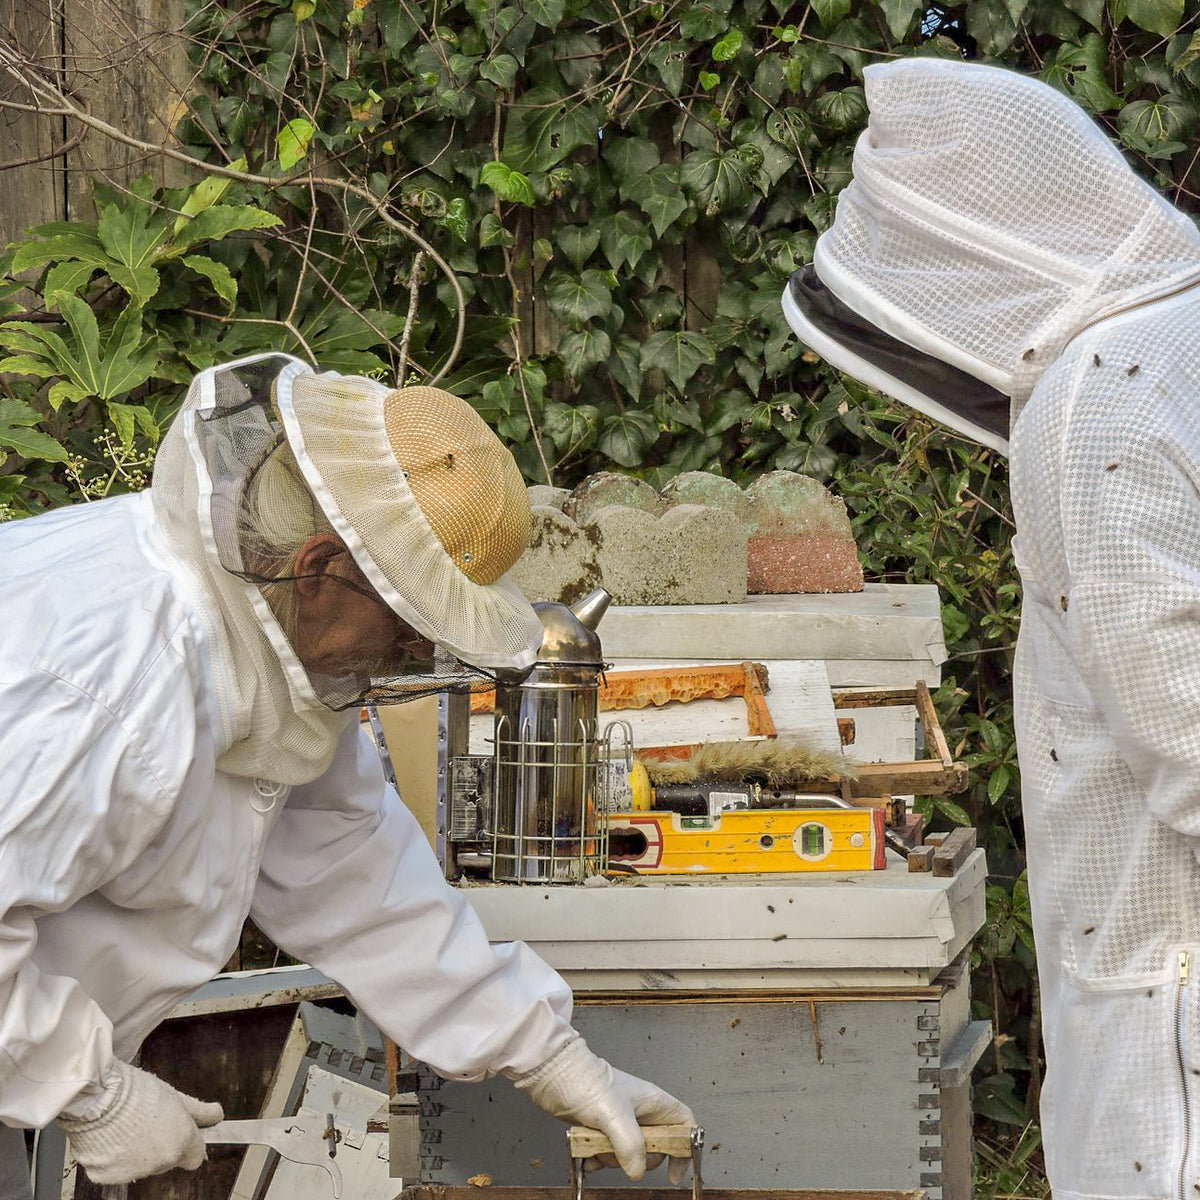 Our beekeeper removing frames from a hive and teaching another person in a beekeeper outfit